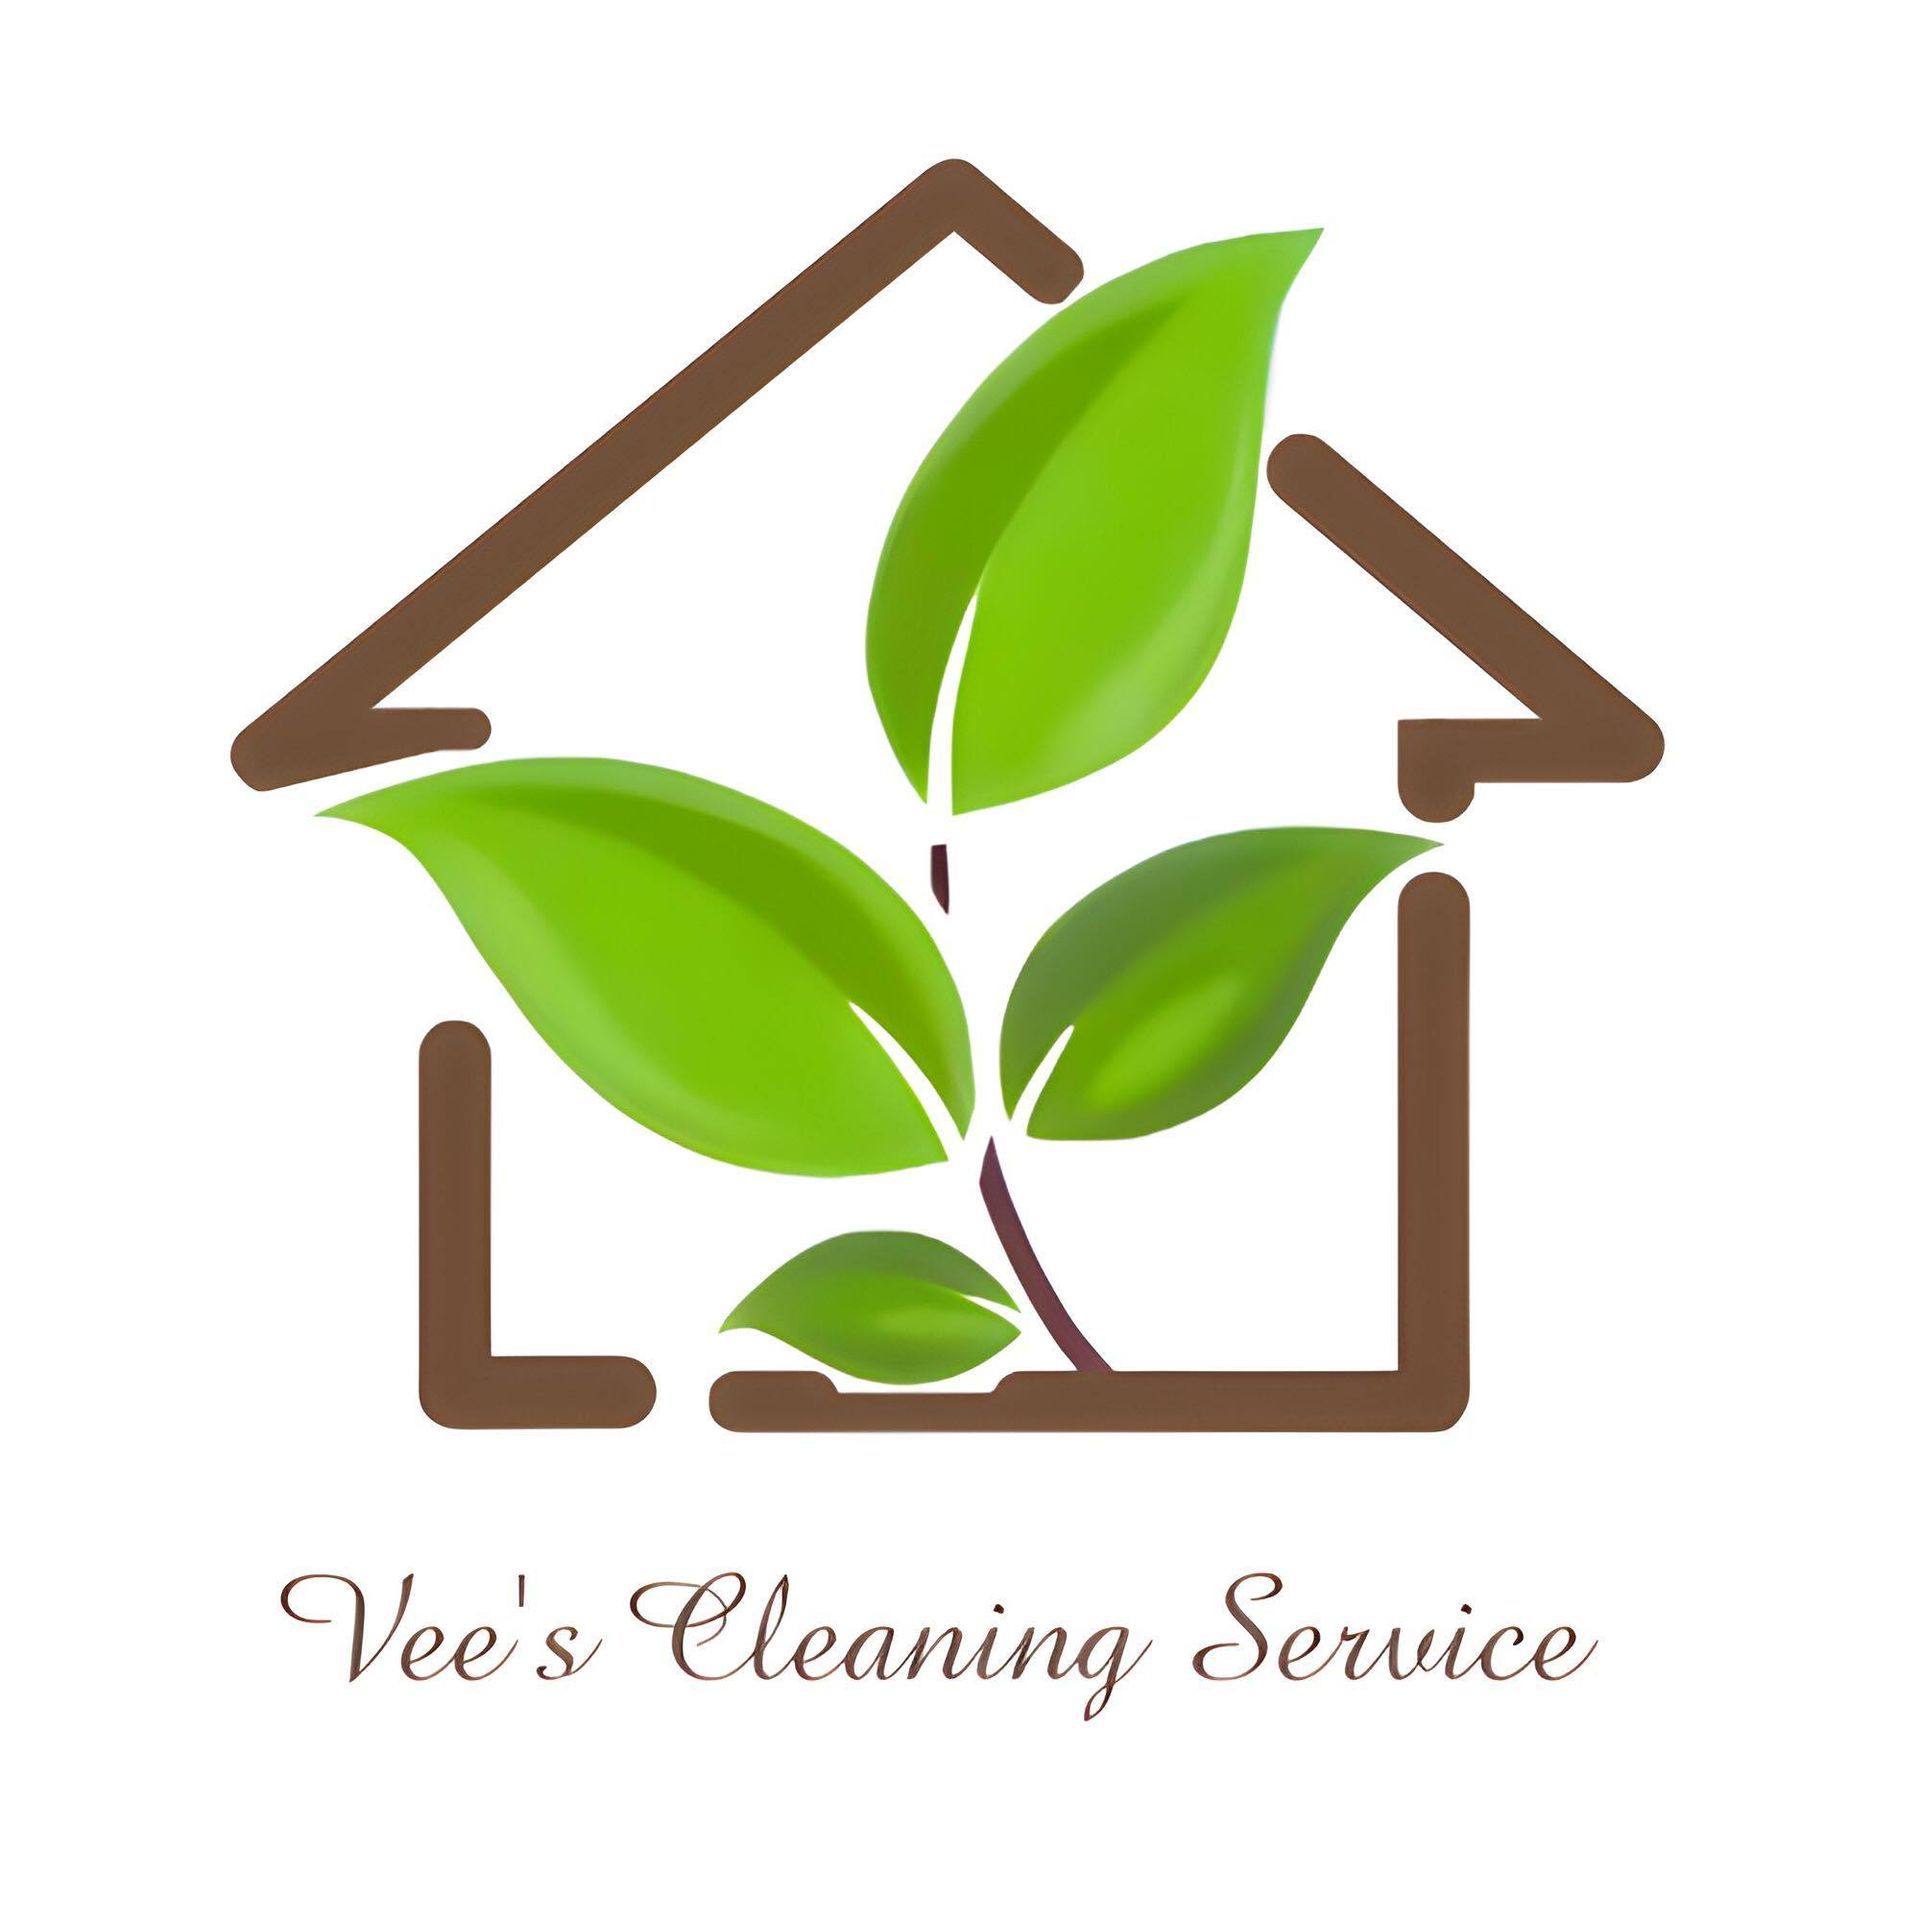 Vee’s Cleaning Service Inc.